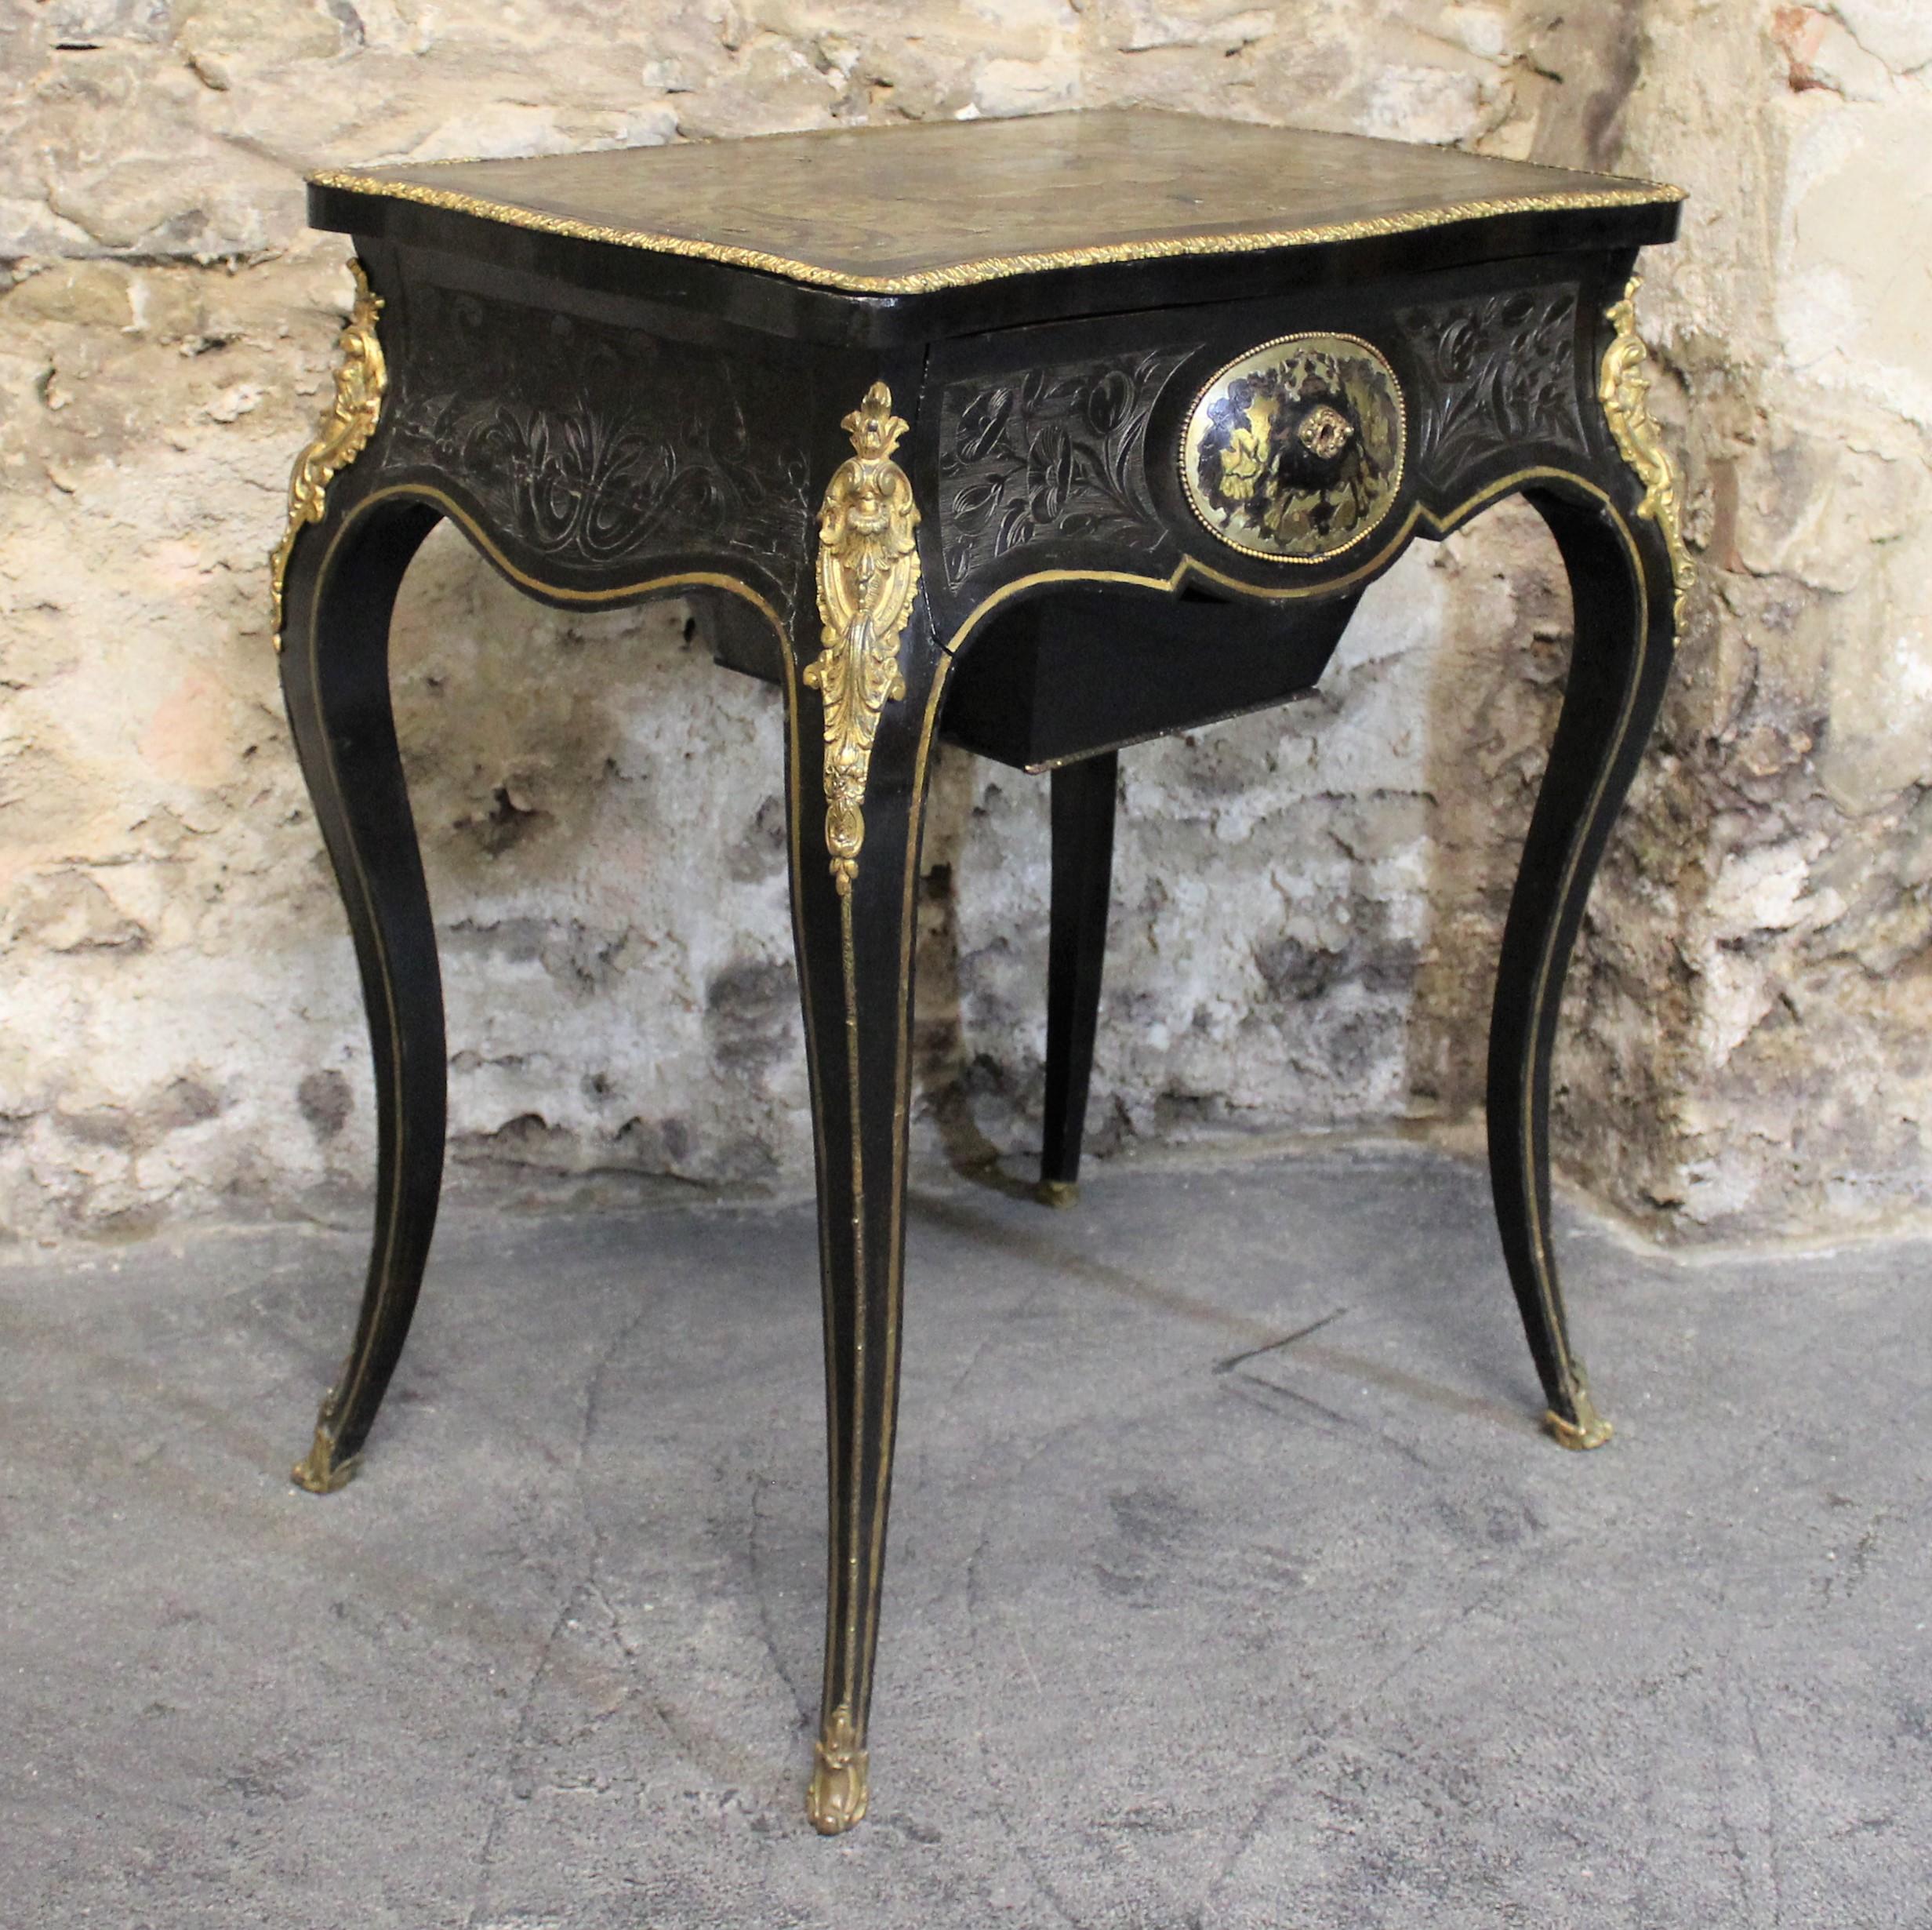 19th century French Louis XVl style boulle and ebonized lowboy or serving table with hinged lid, interior mirror and bronze mounts.